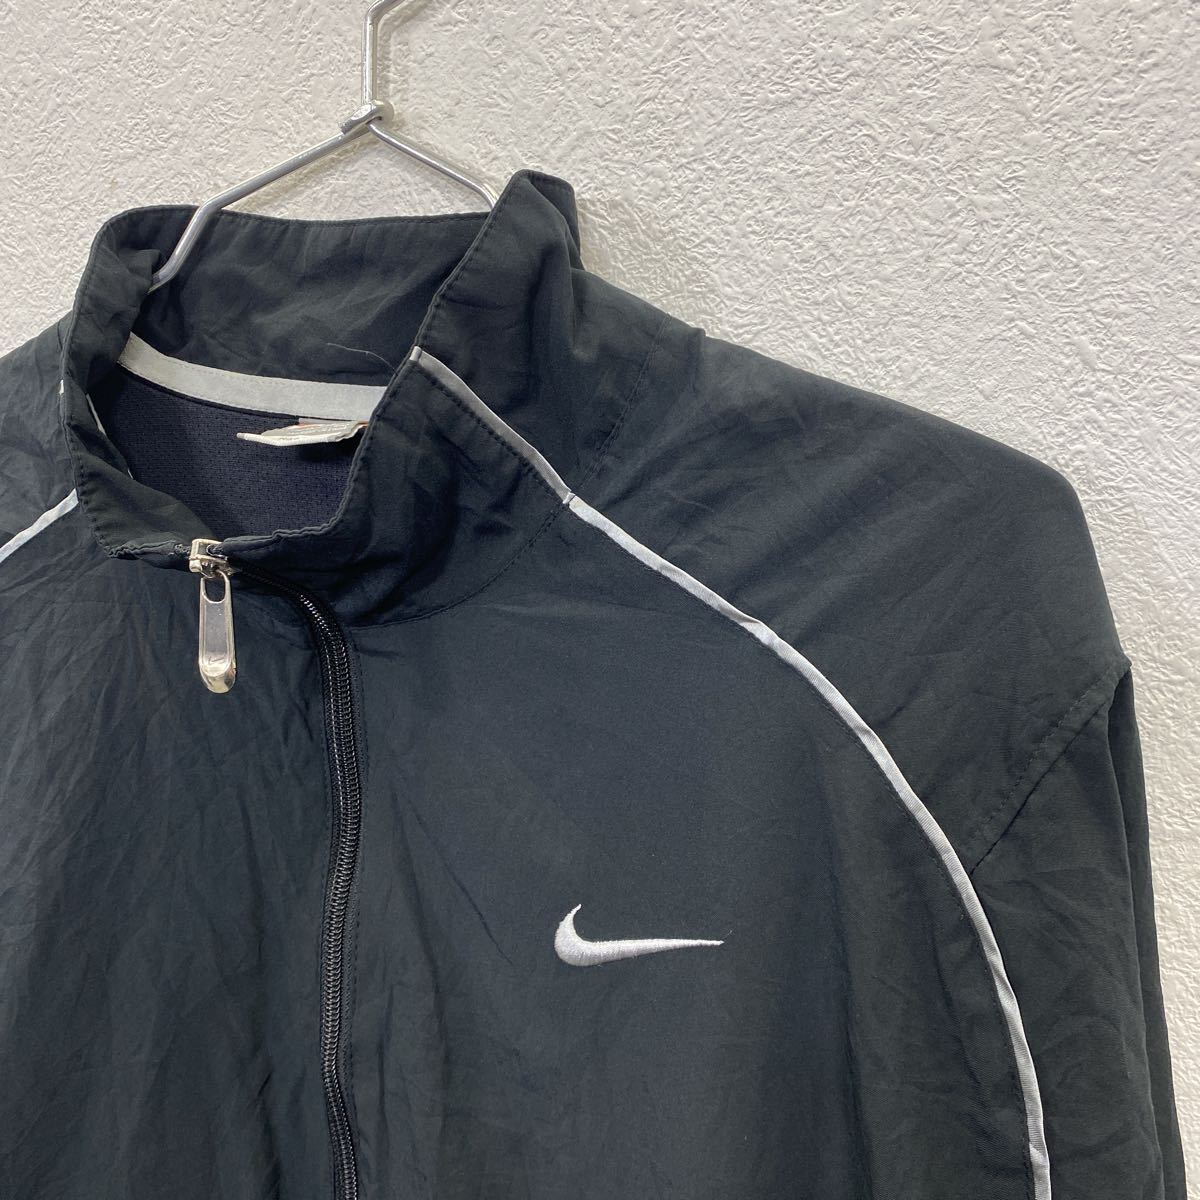 NIKE Zip up jacket XL size Nike sport jersey black old clothes . America buying up t2208-3333